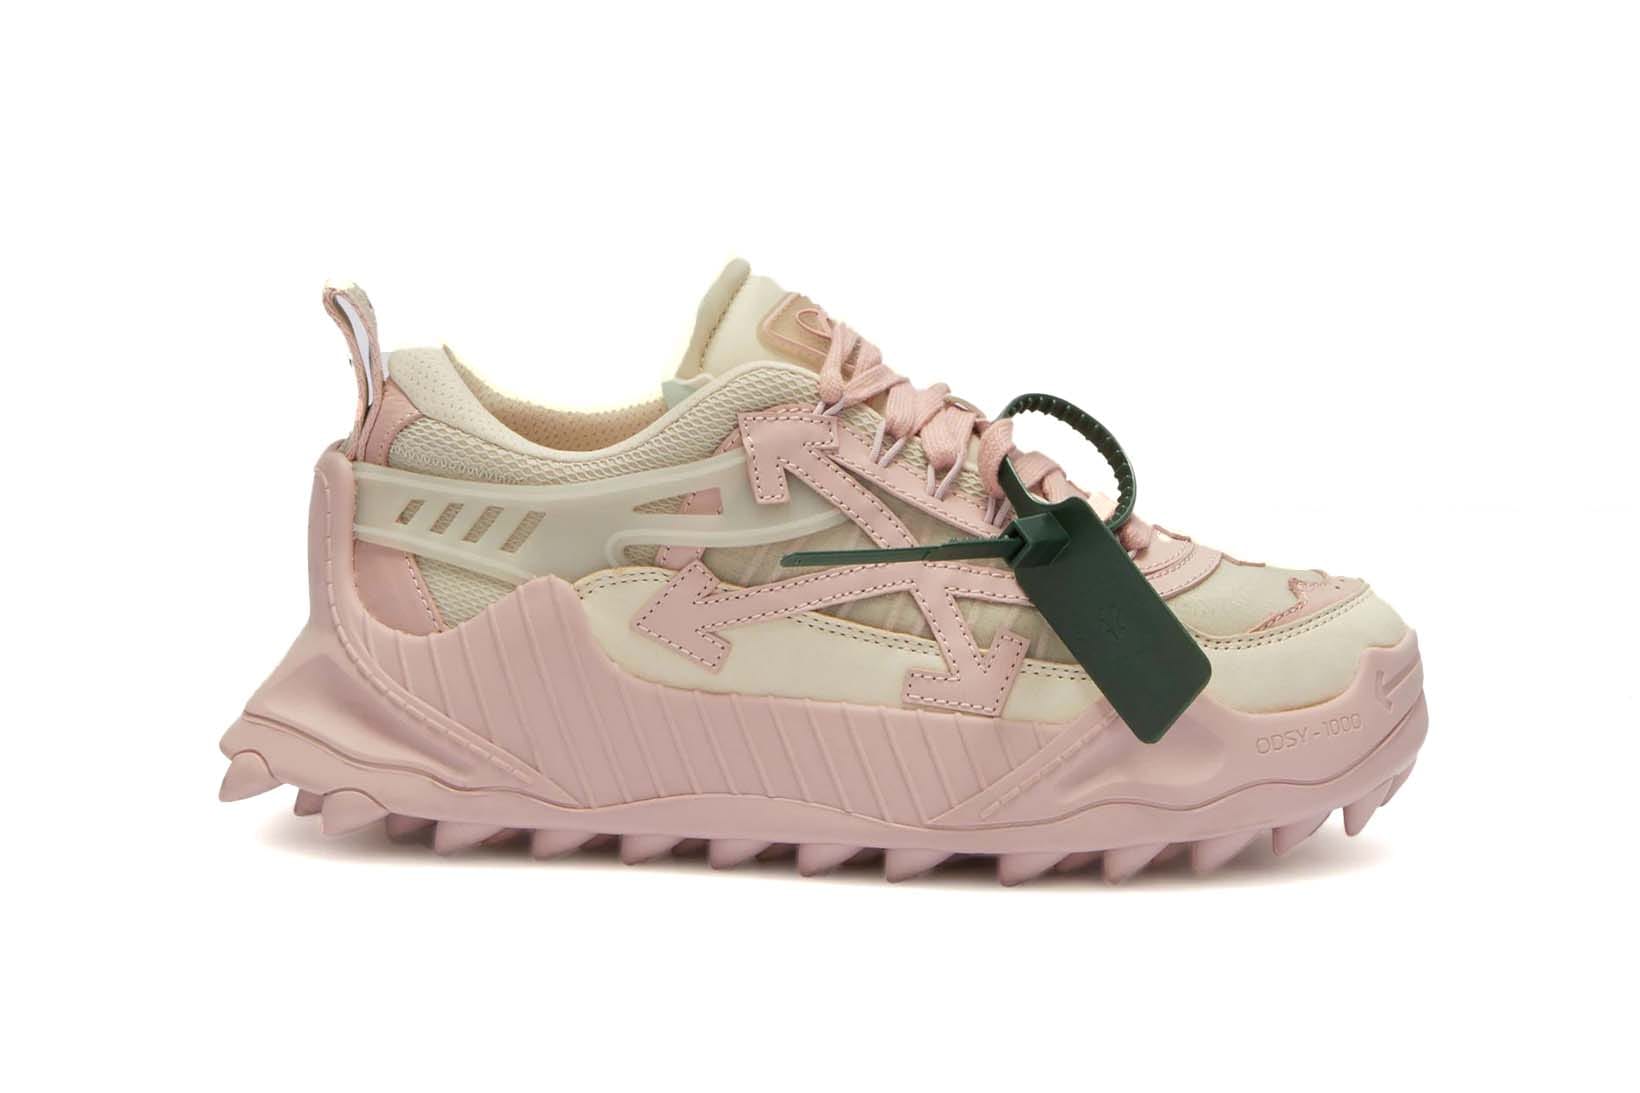 Off-White™ Odsy-1000 Sneaker Gets Pink Colorway | HYPEBAE